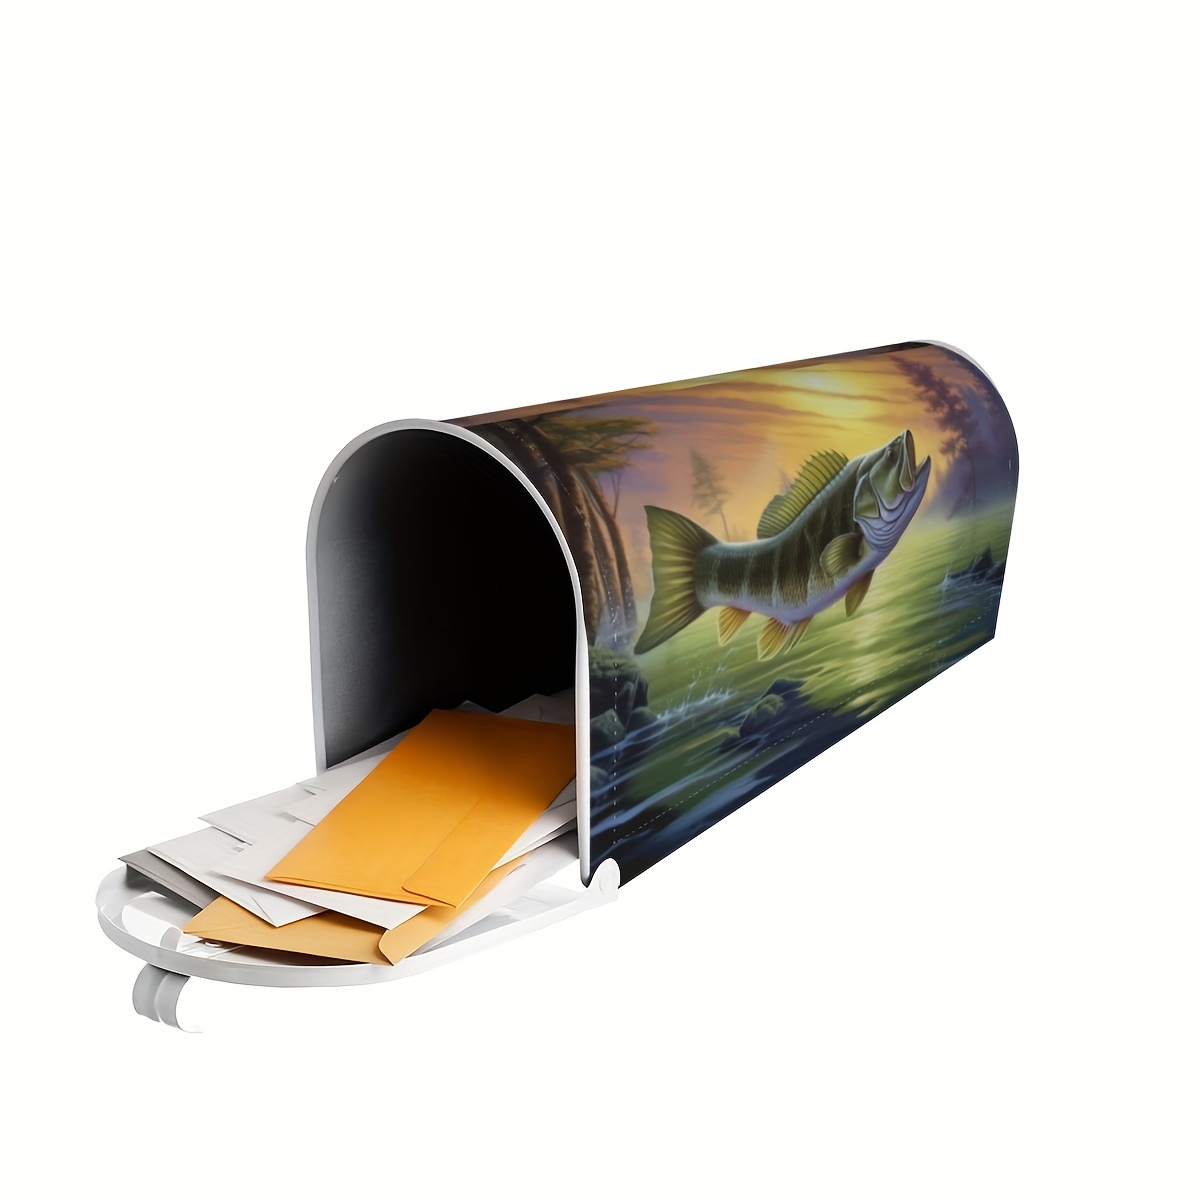 Bass Fish Mailbox Cover Mailbox Wraps, Waterproof Mailbox Covers